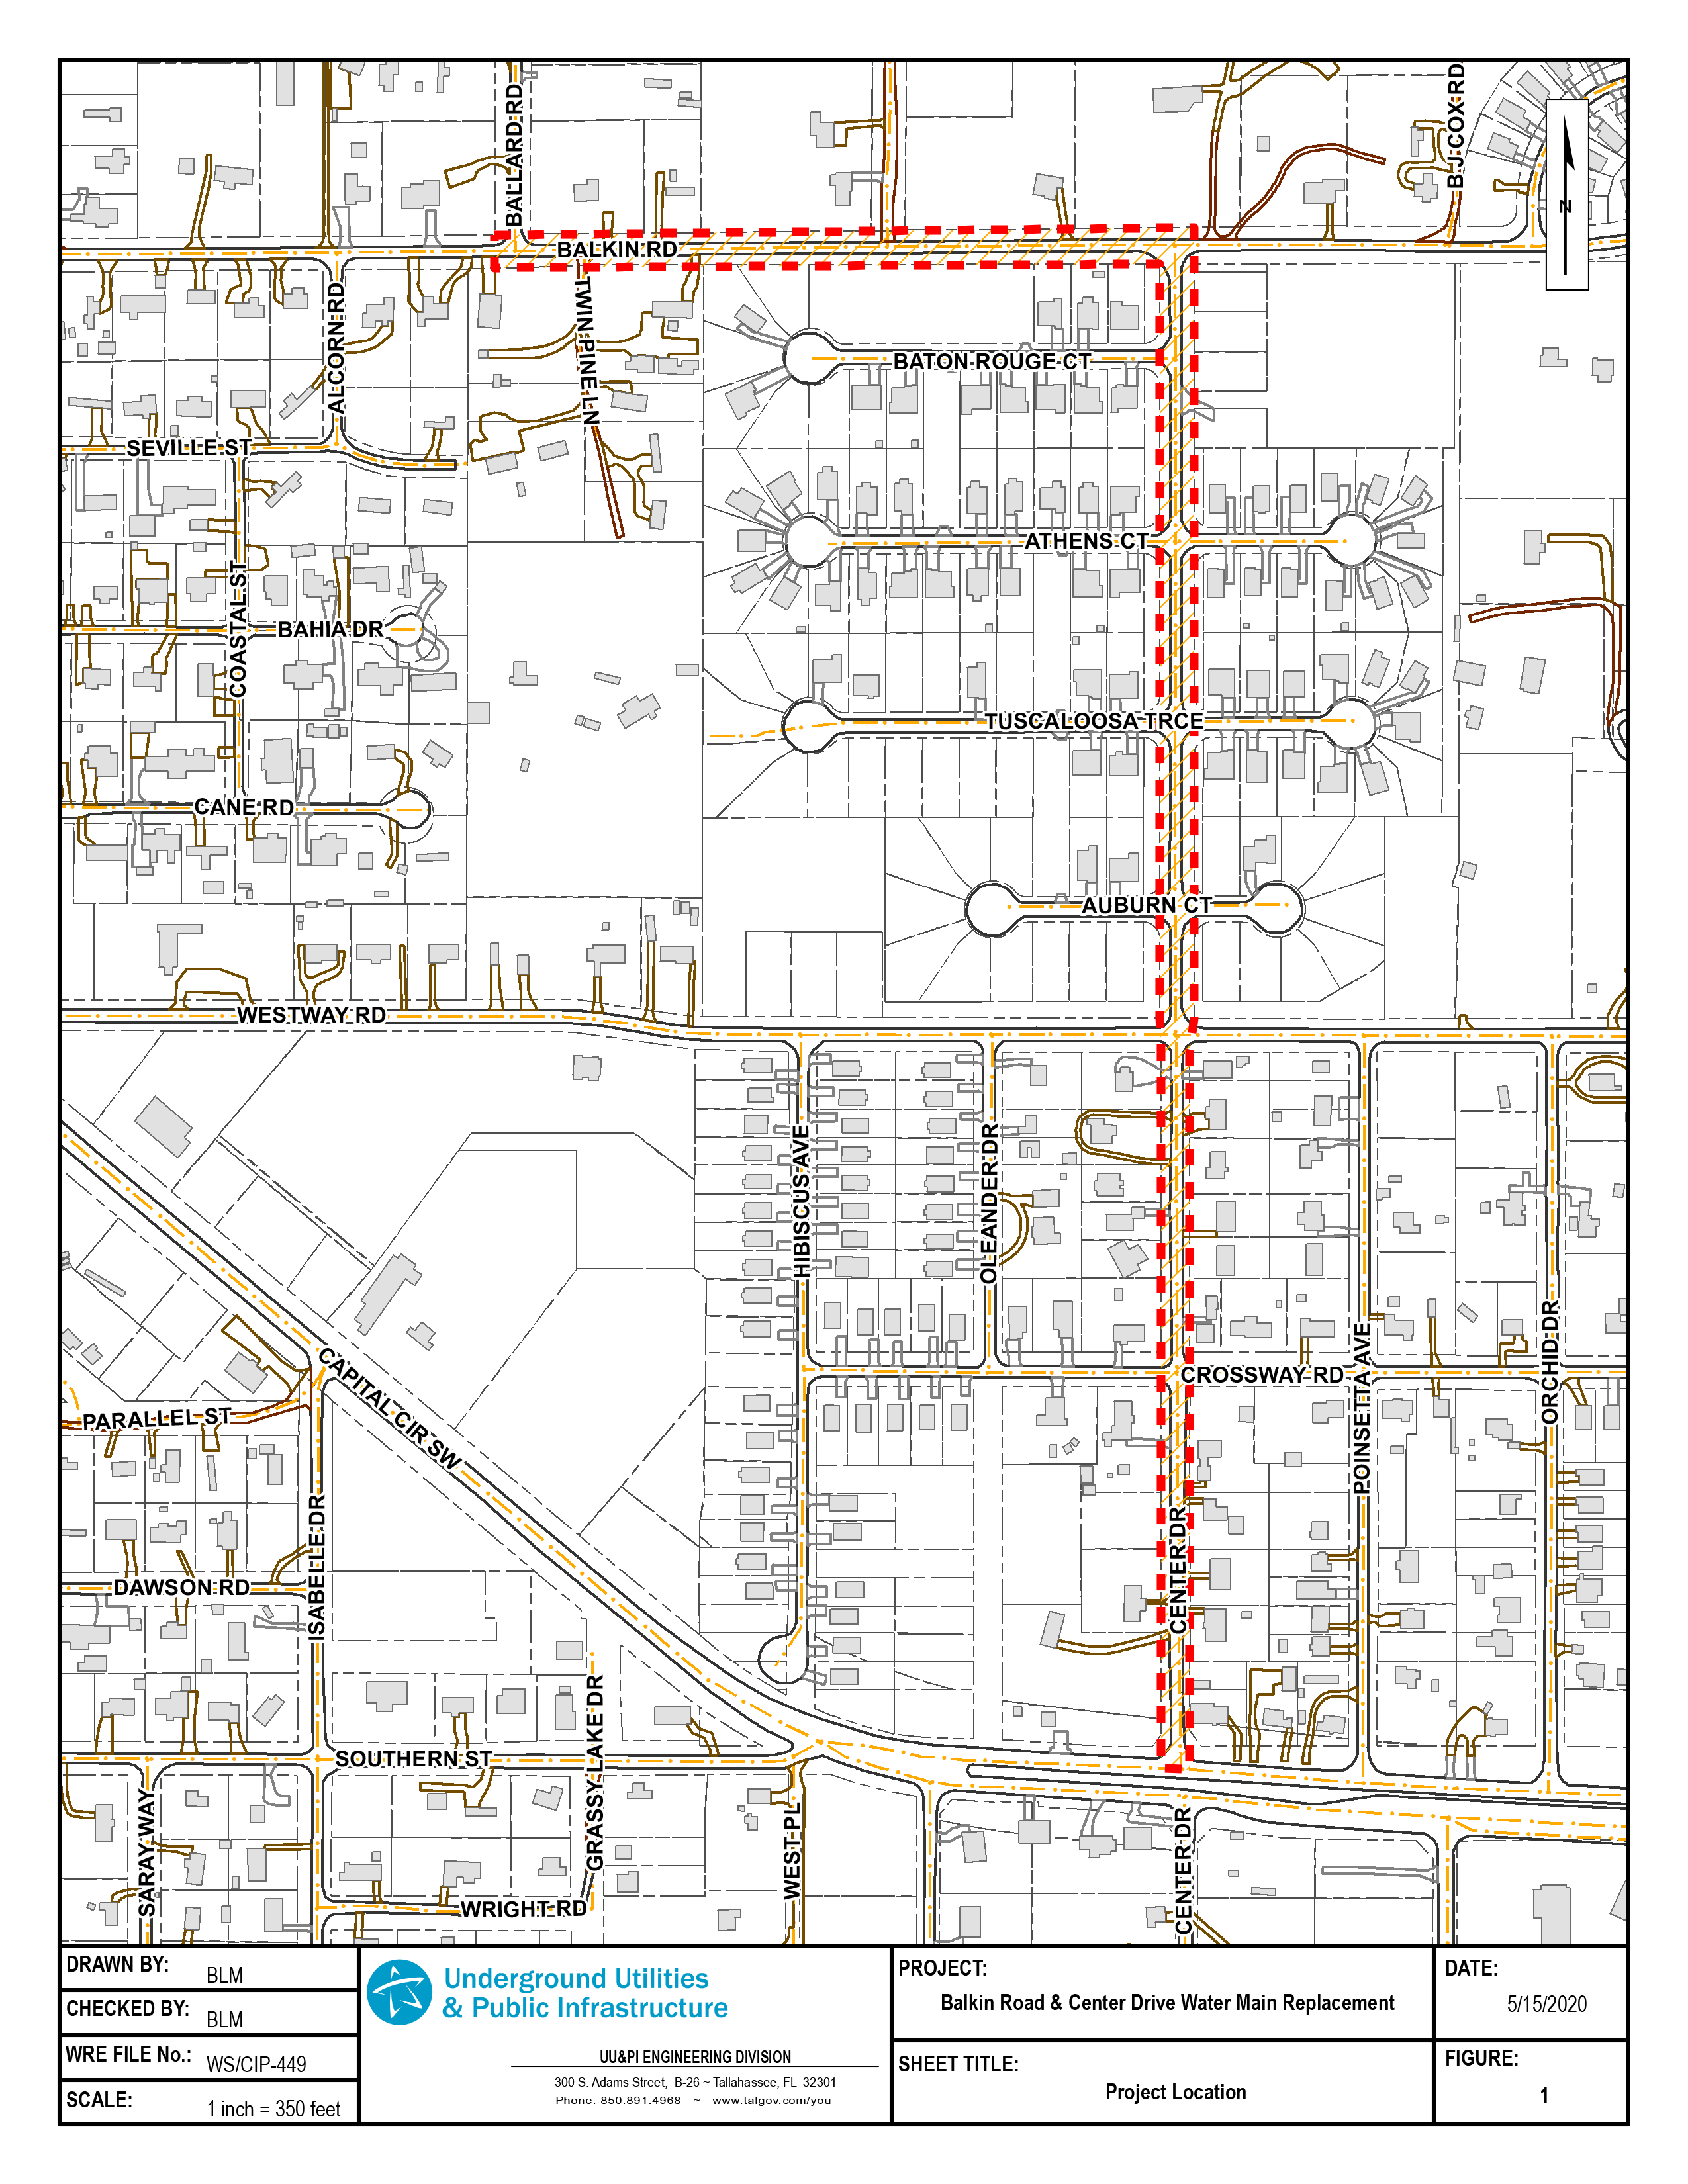 A map of the Balkin Road and Center Drive Water Main Replacement project